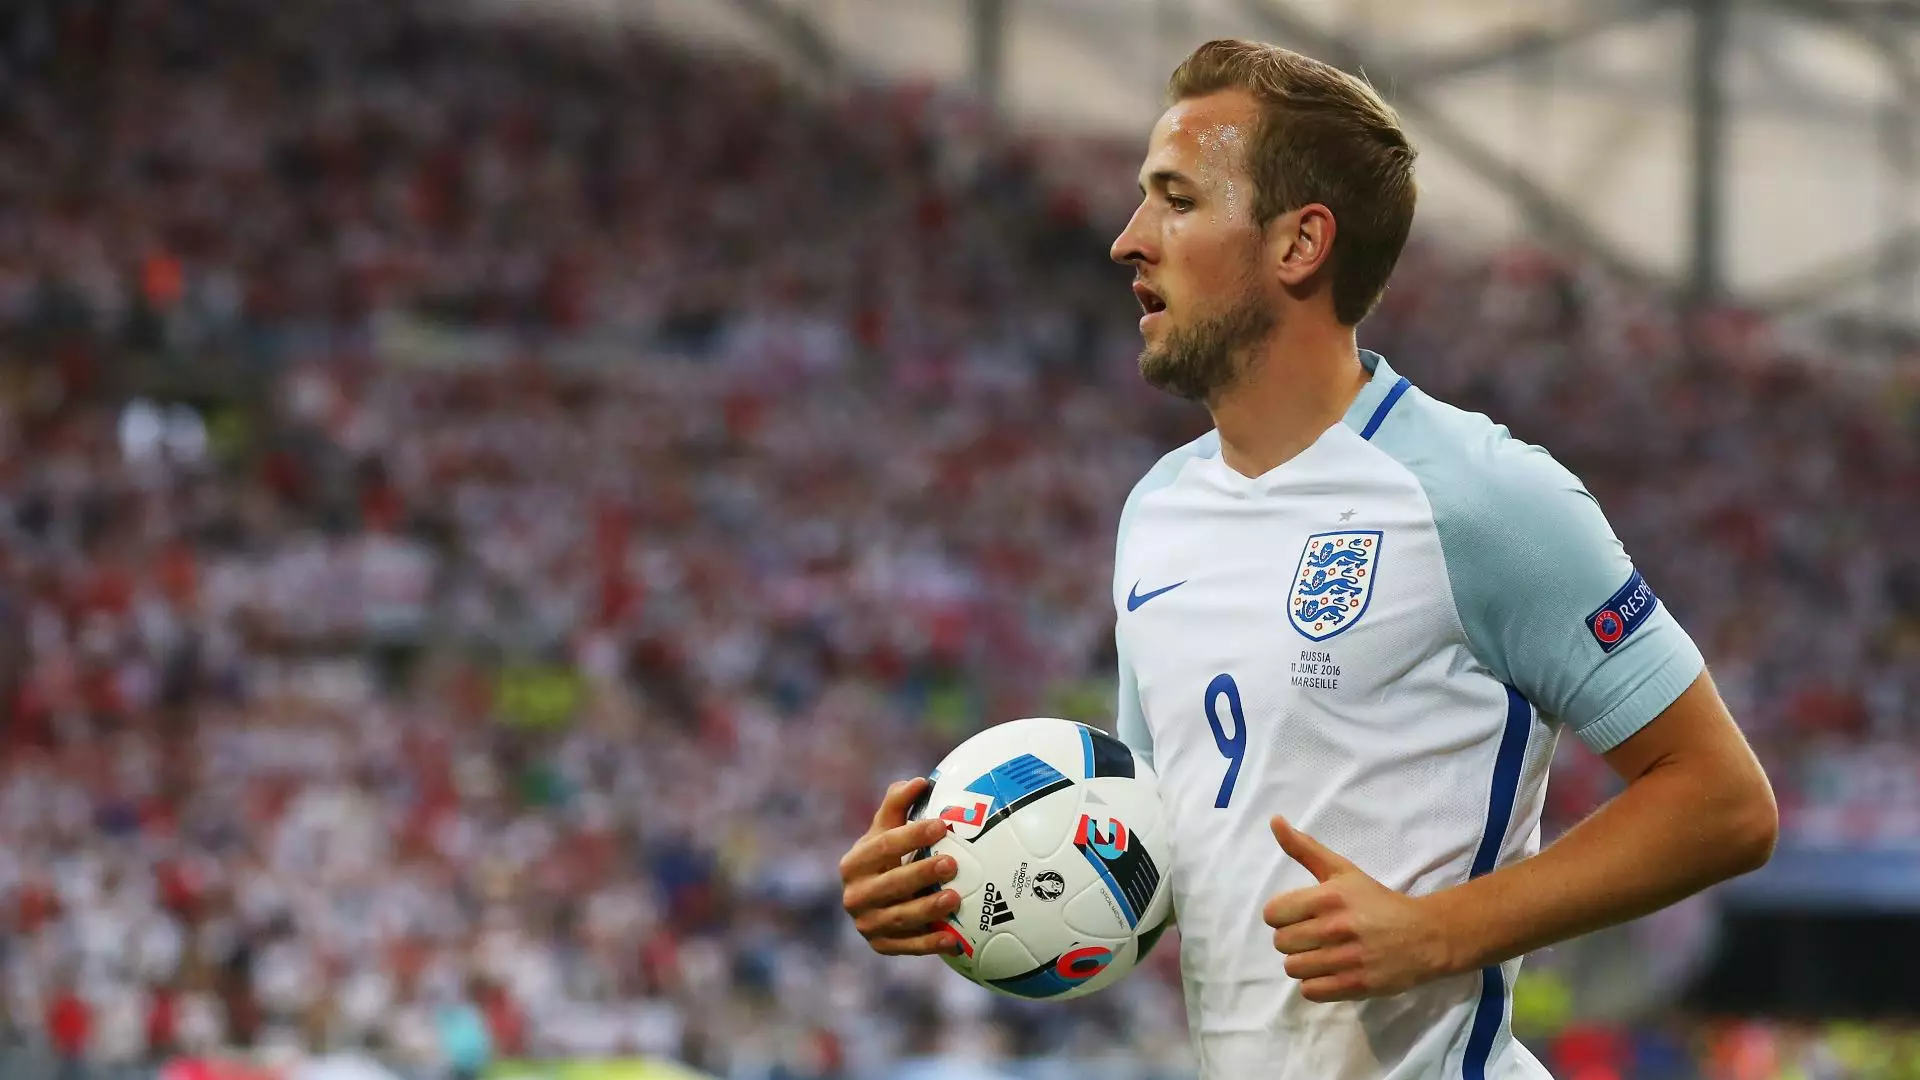 England will be hoping Kane is back in time to take corners. Image: PA Images